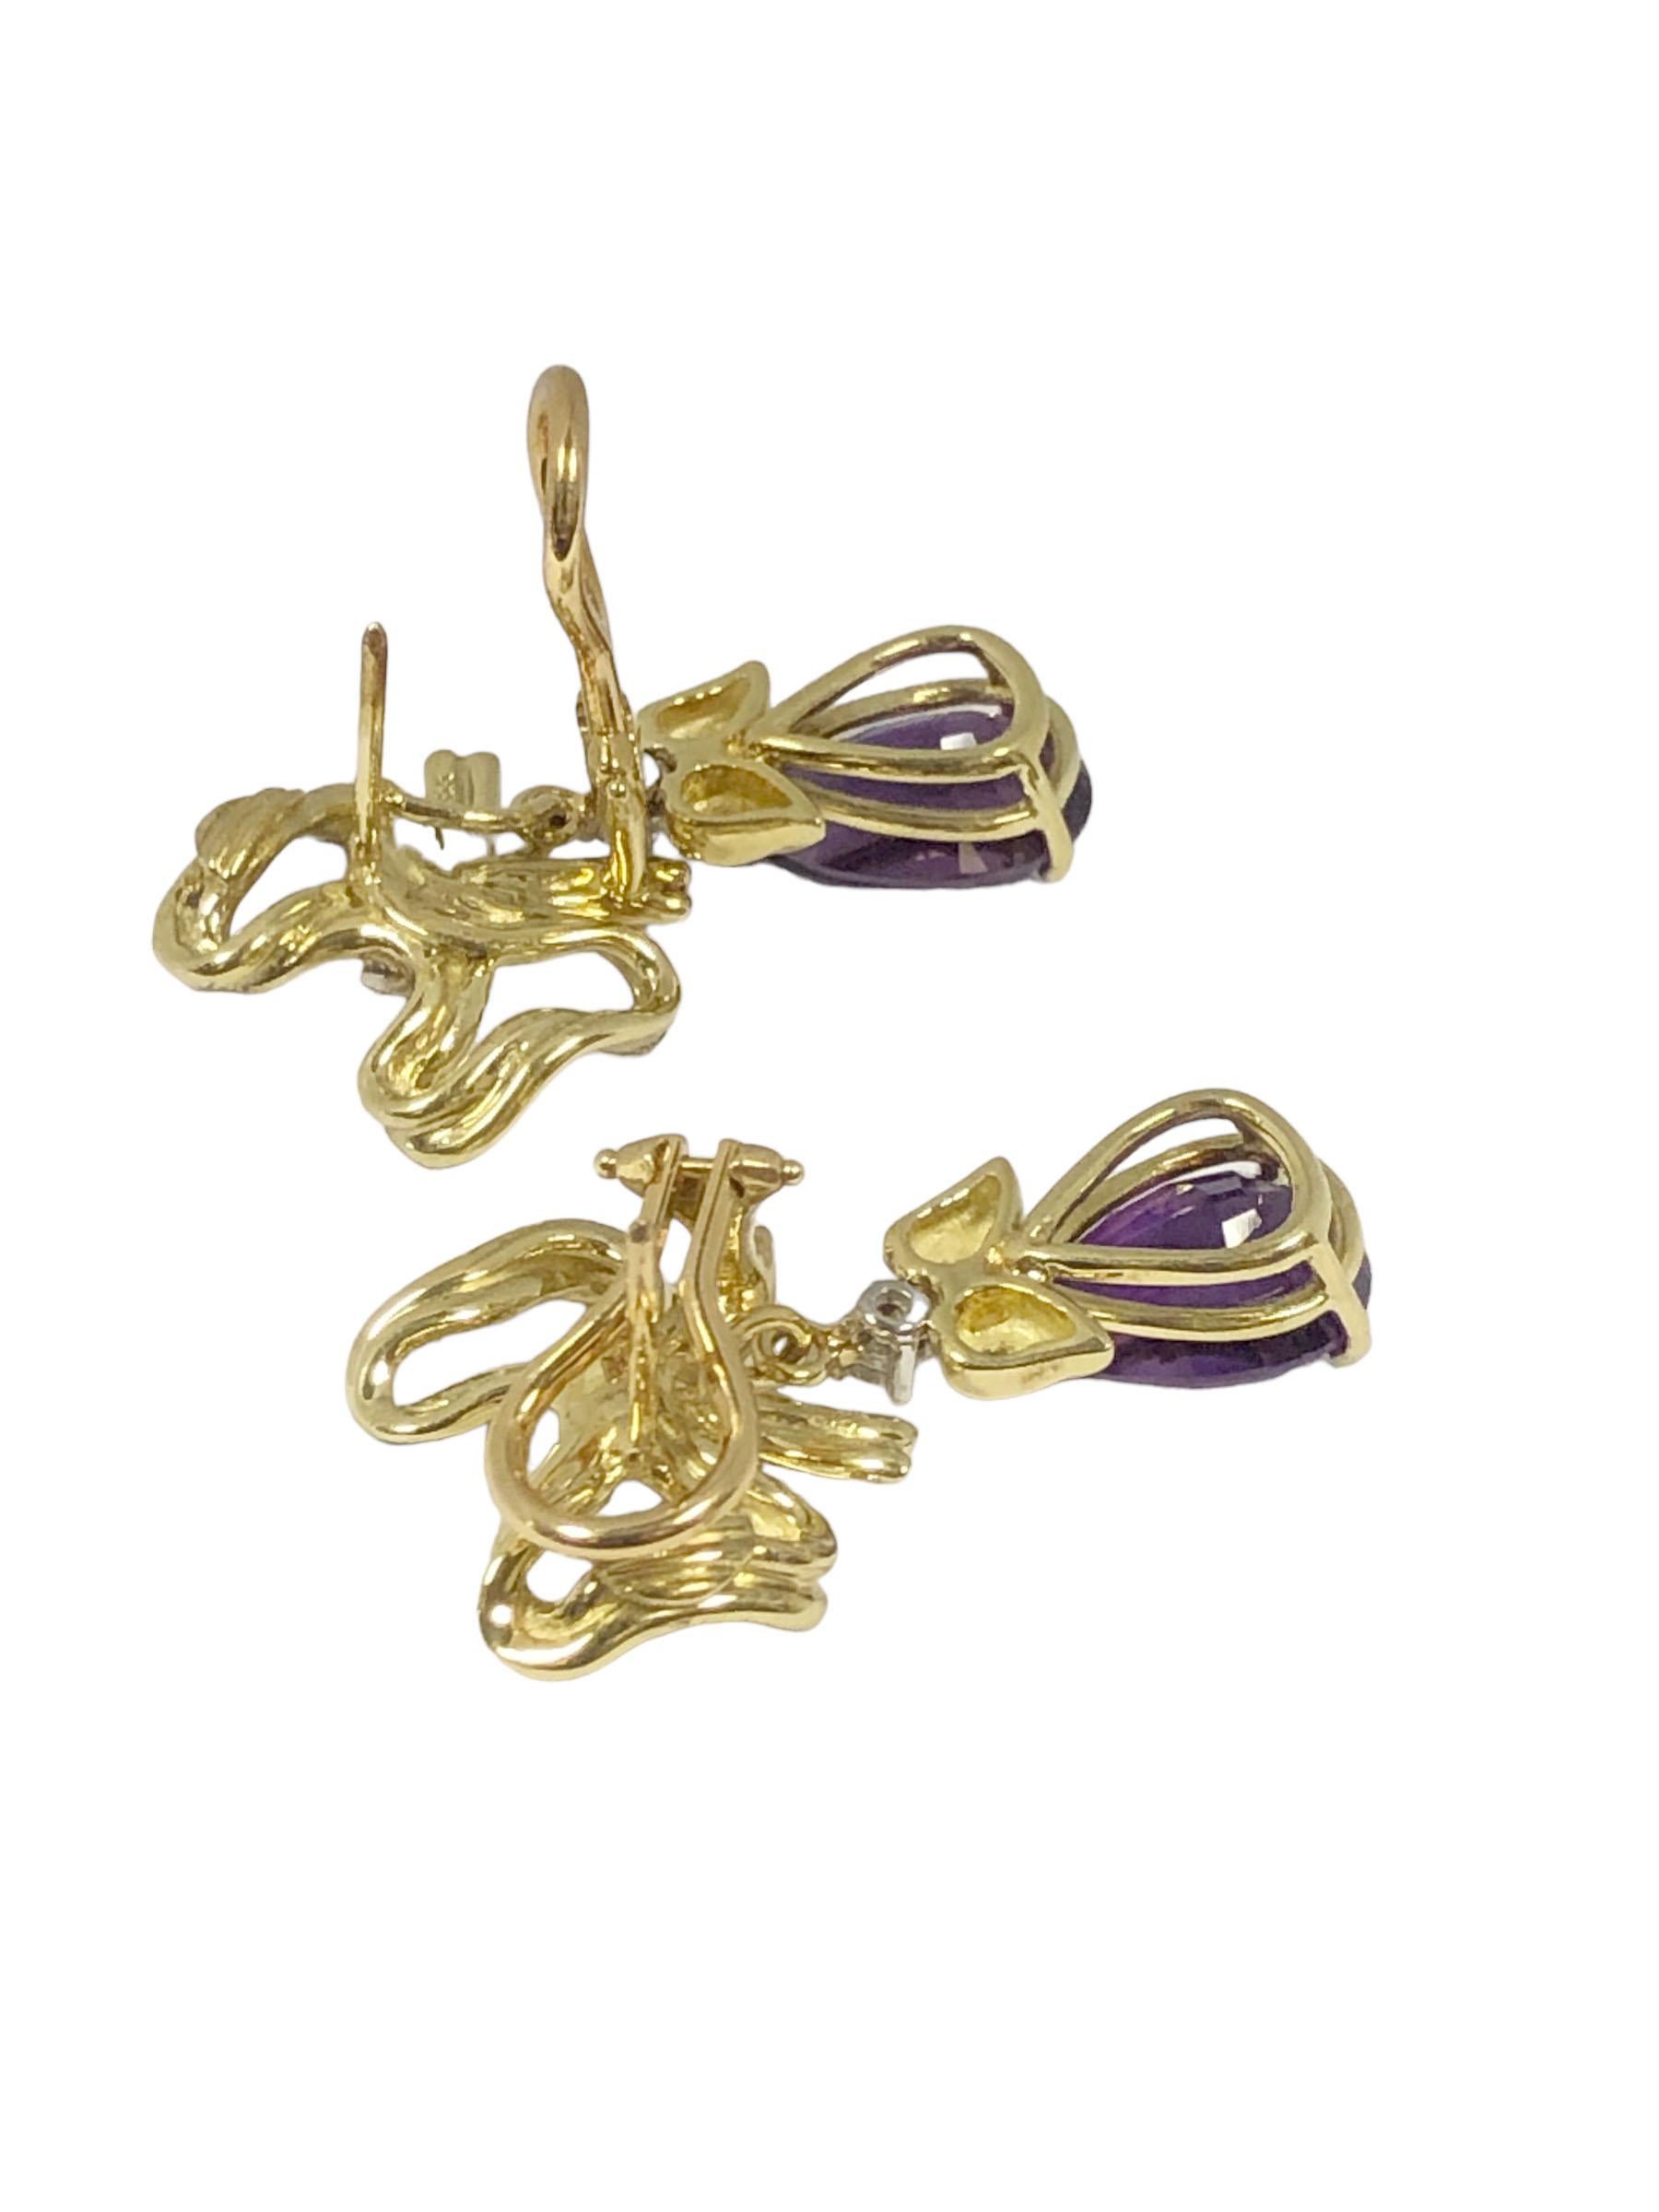 Circa 1990 Tiffany & Company 18k Yellow Gold Earrings, measuring 1 1/8 inches in length and 5/8 inch wide, in a Ribbon and Bow form with the bottom dangle Amethyst section being removable so the bow form tops can be worn alone. Set with Round